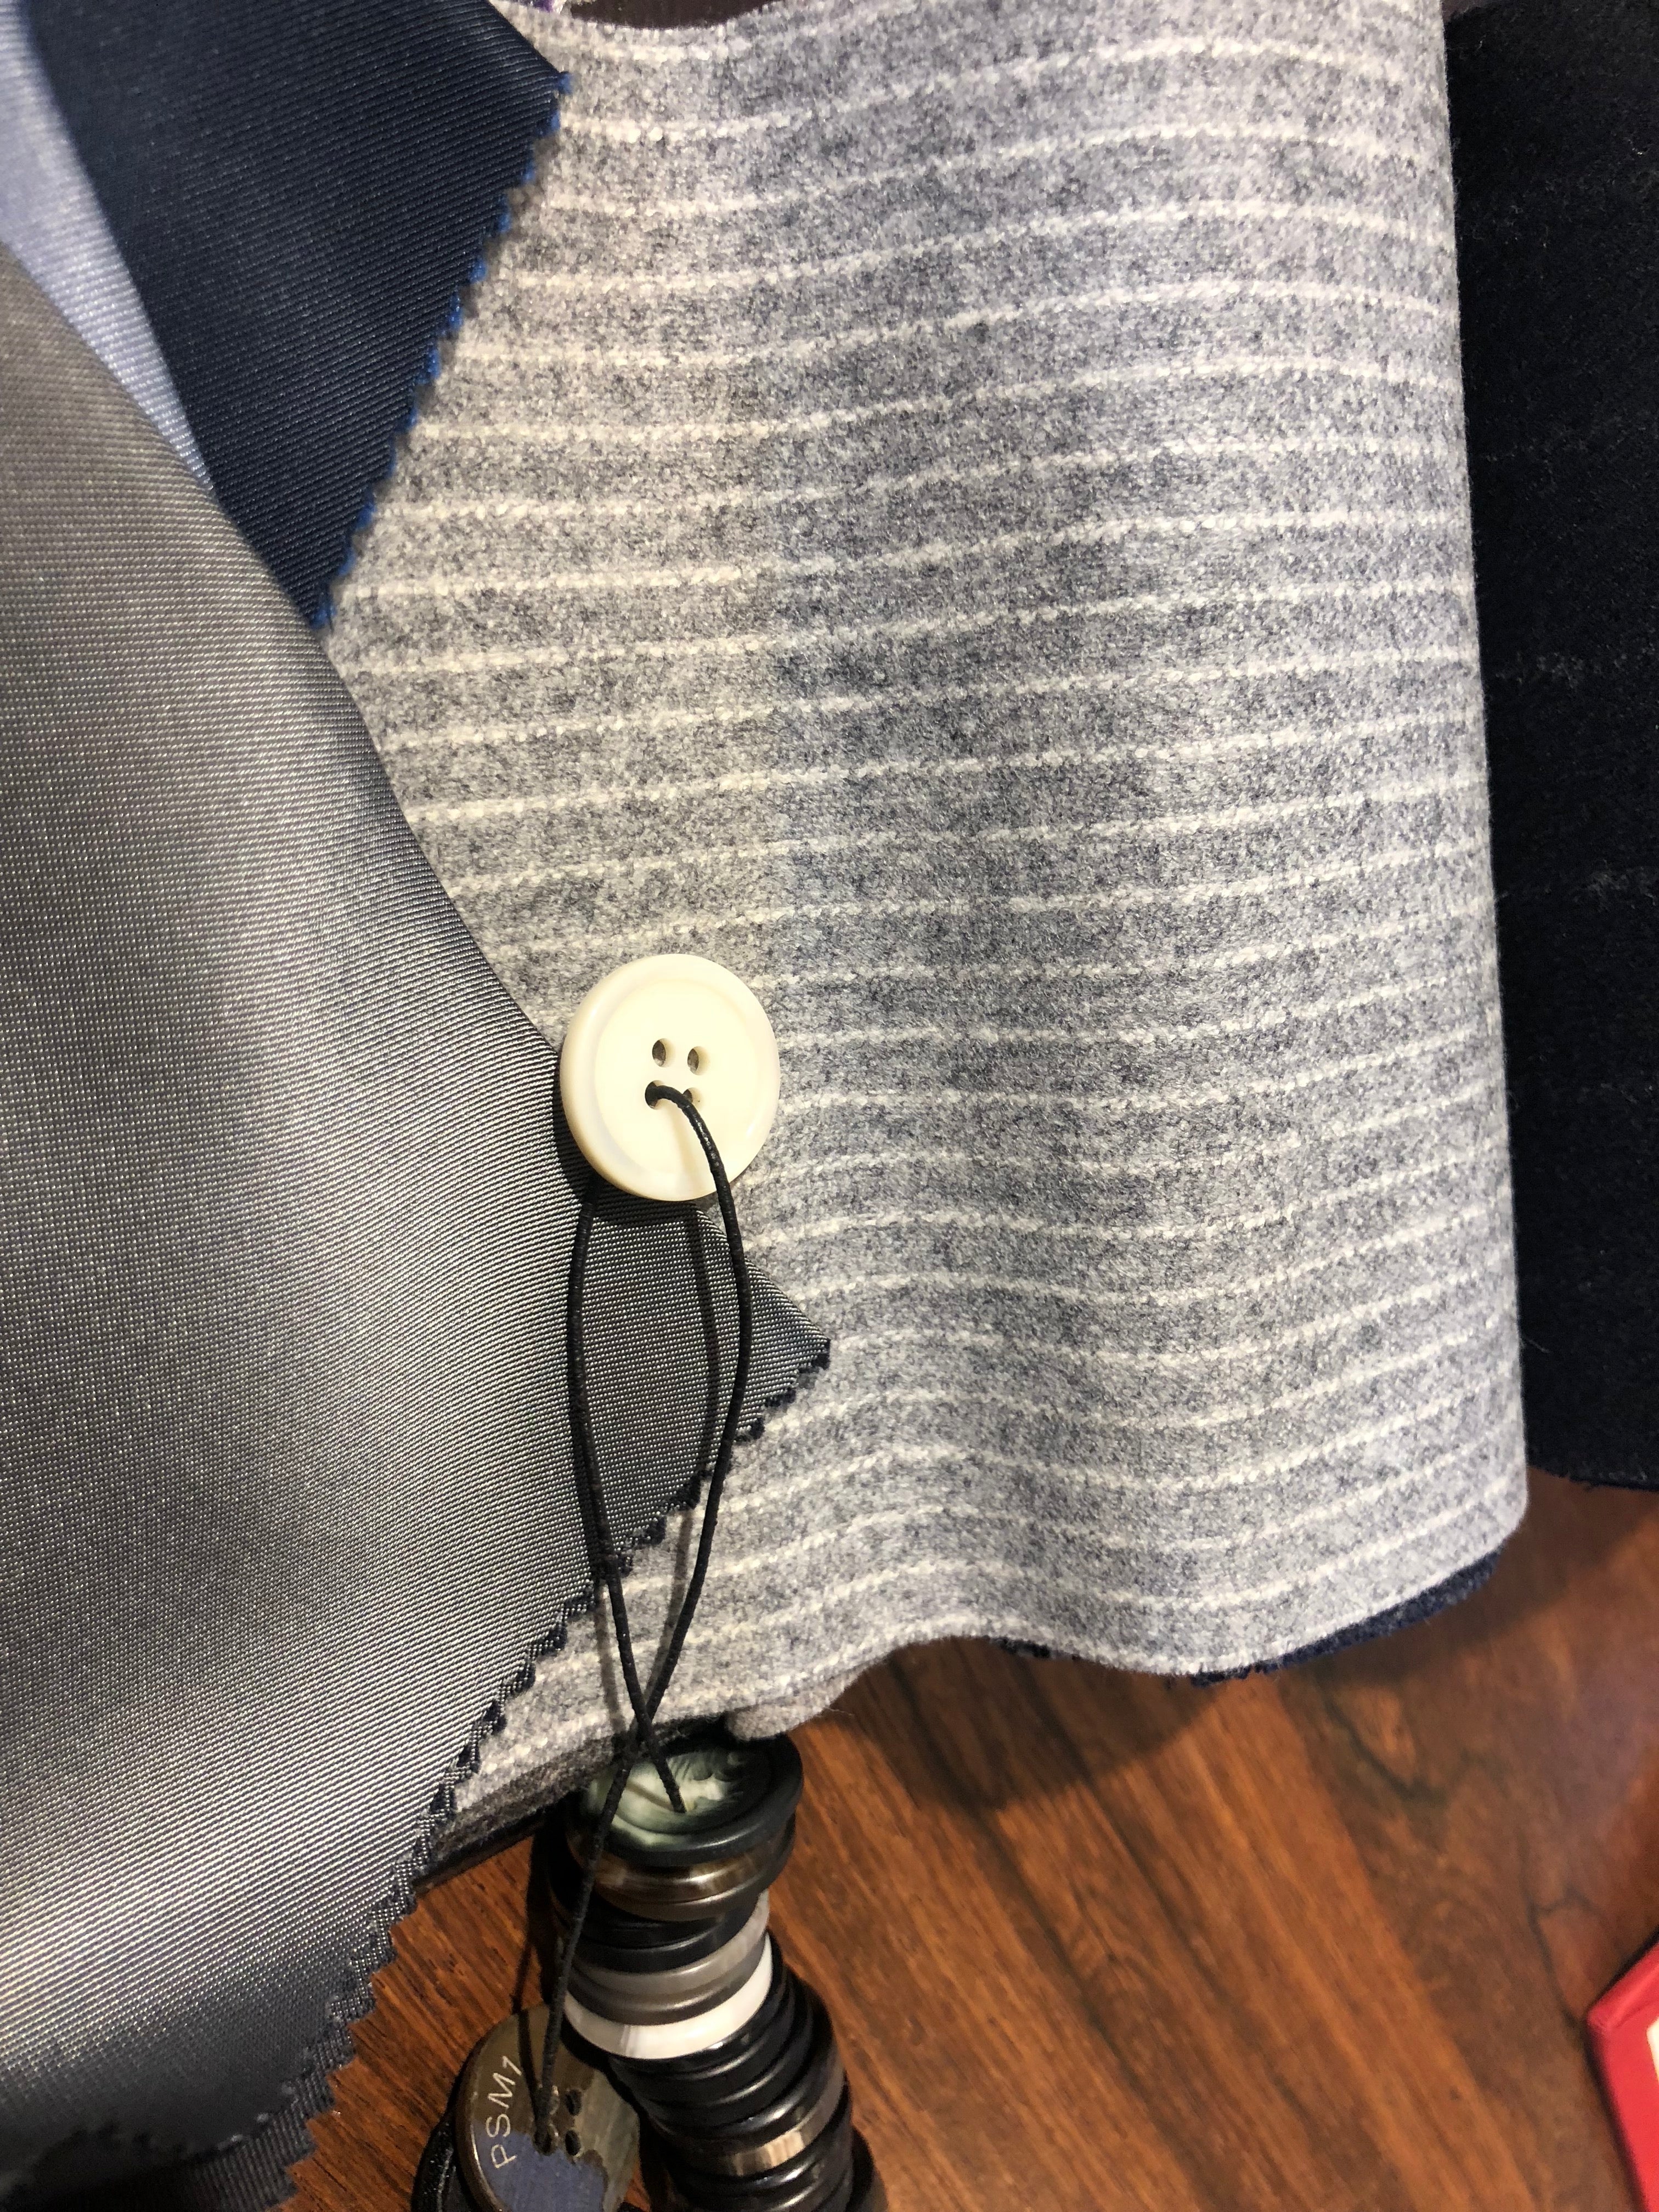 Italian Lightweight Flannel in Grey Fine Chalk Stripe, a Complimentary Lining and Mother of Pearl Button, all chosen by Alistair with the expert advice from Philip.